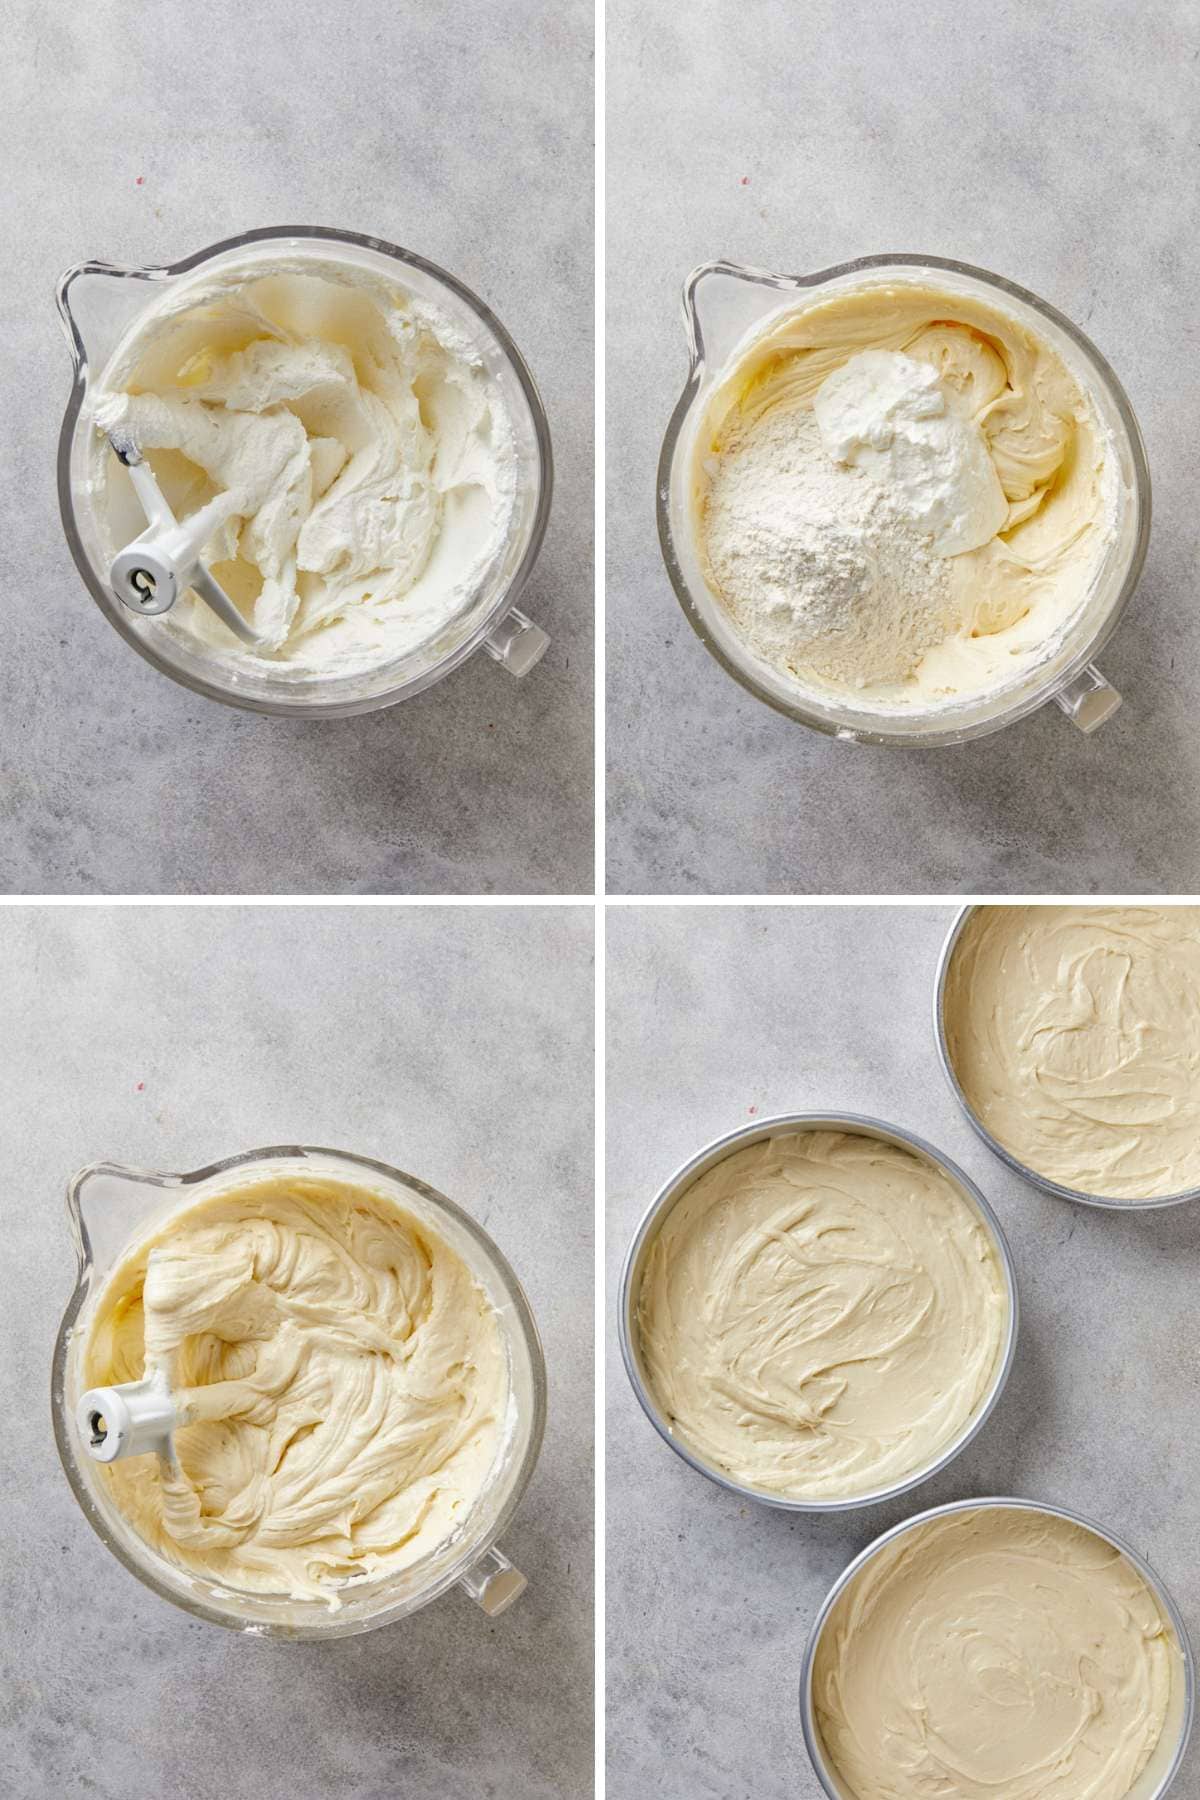 A collage of images showing the steps for making the yellow butter cake batter.